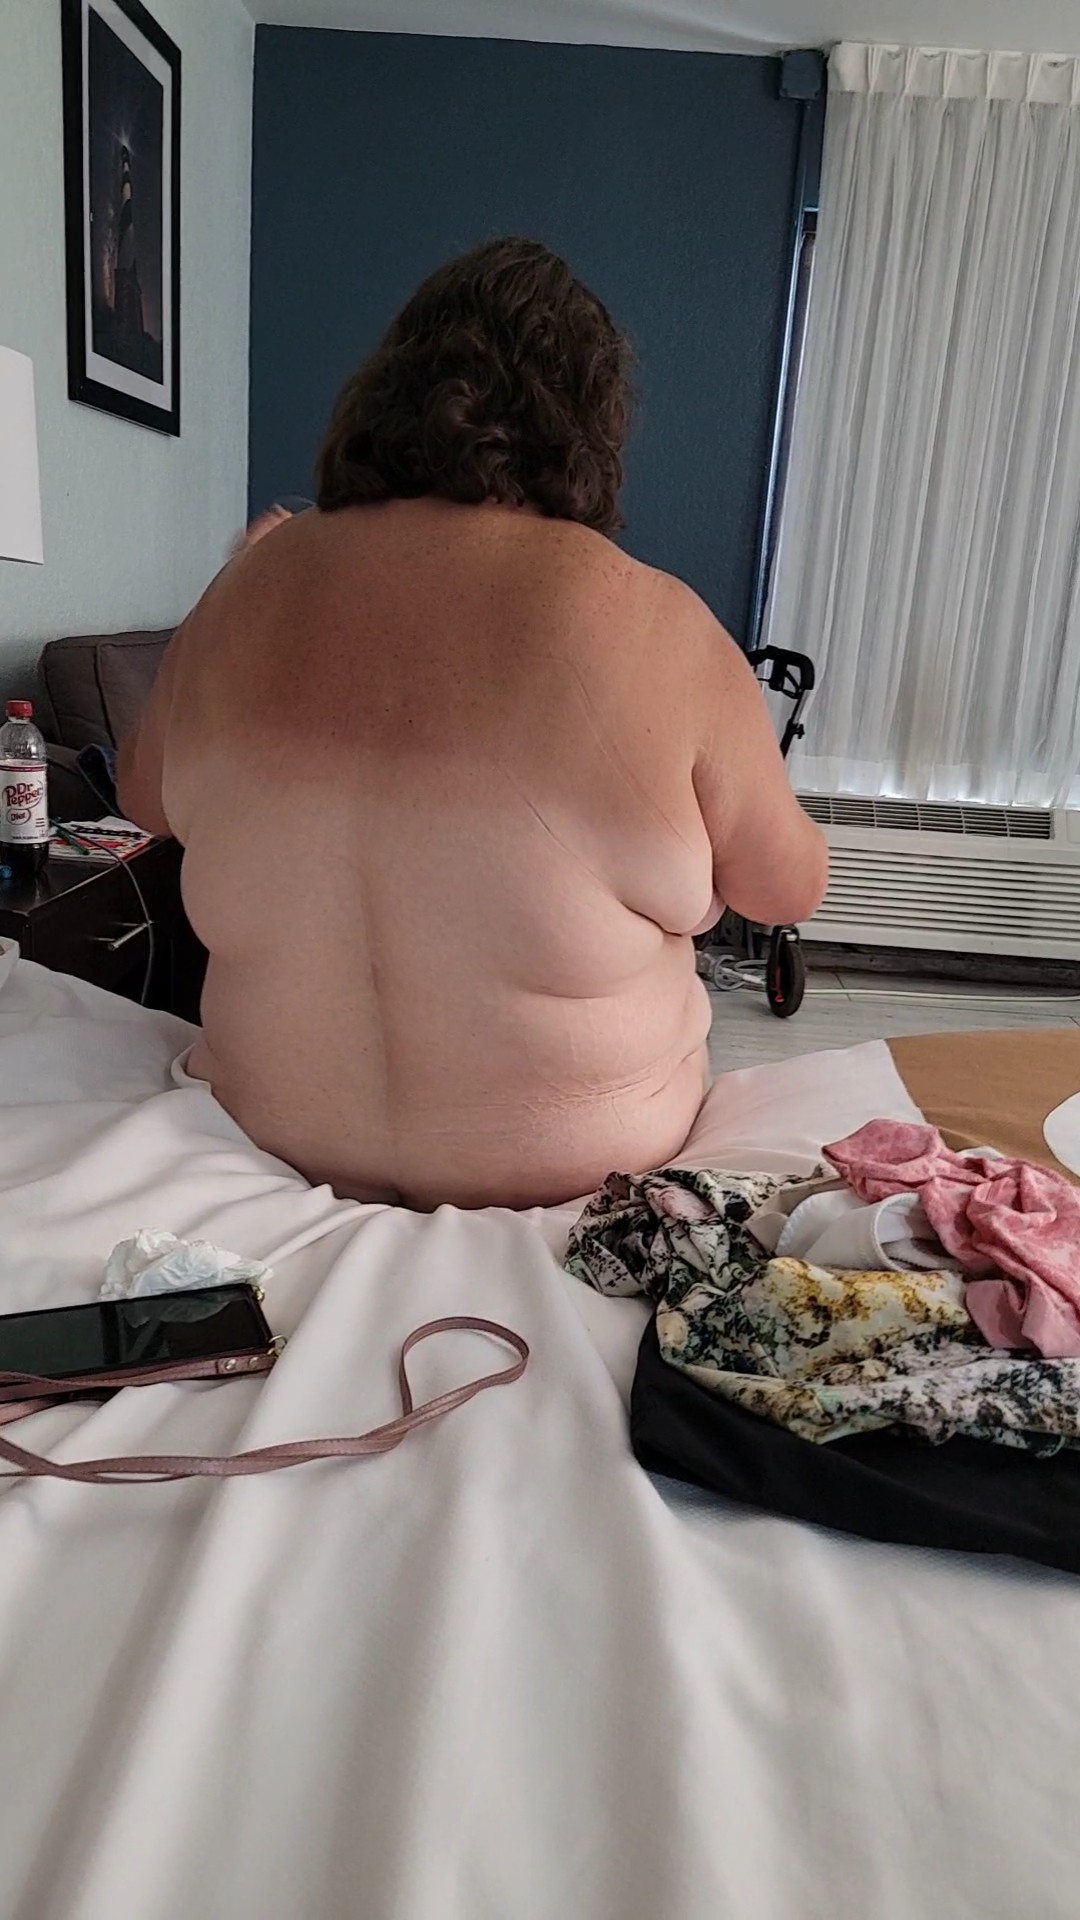 Amputee BBW wife with huge titties that have large areolas